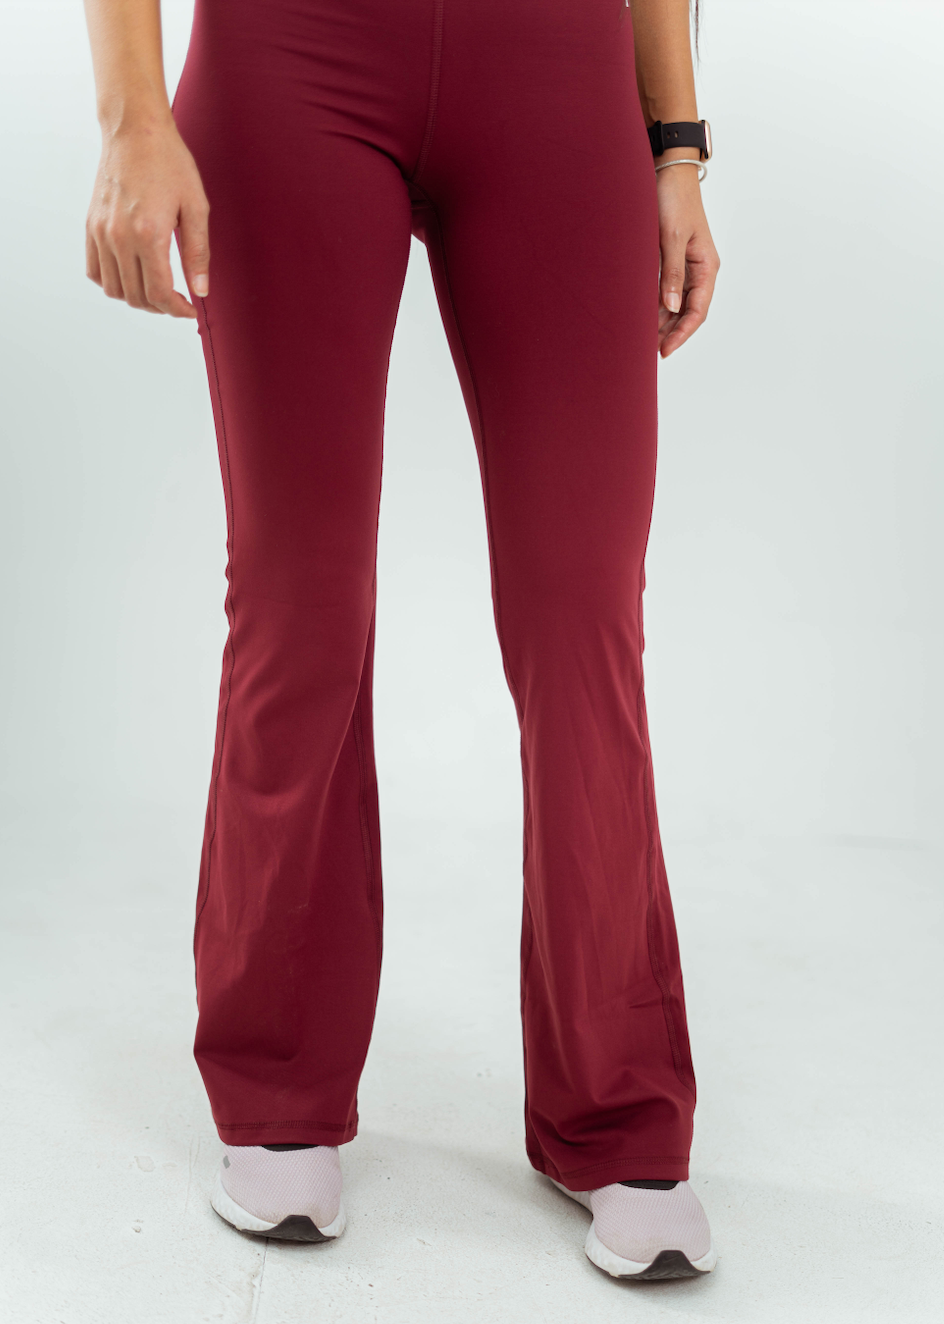 Skechers Women's GO Walk High Waisted Flare Pant, Beet Red, X